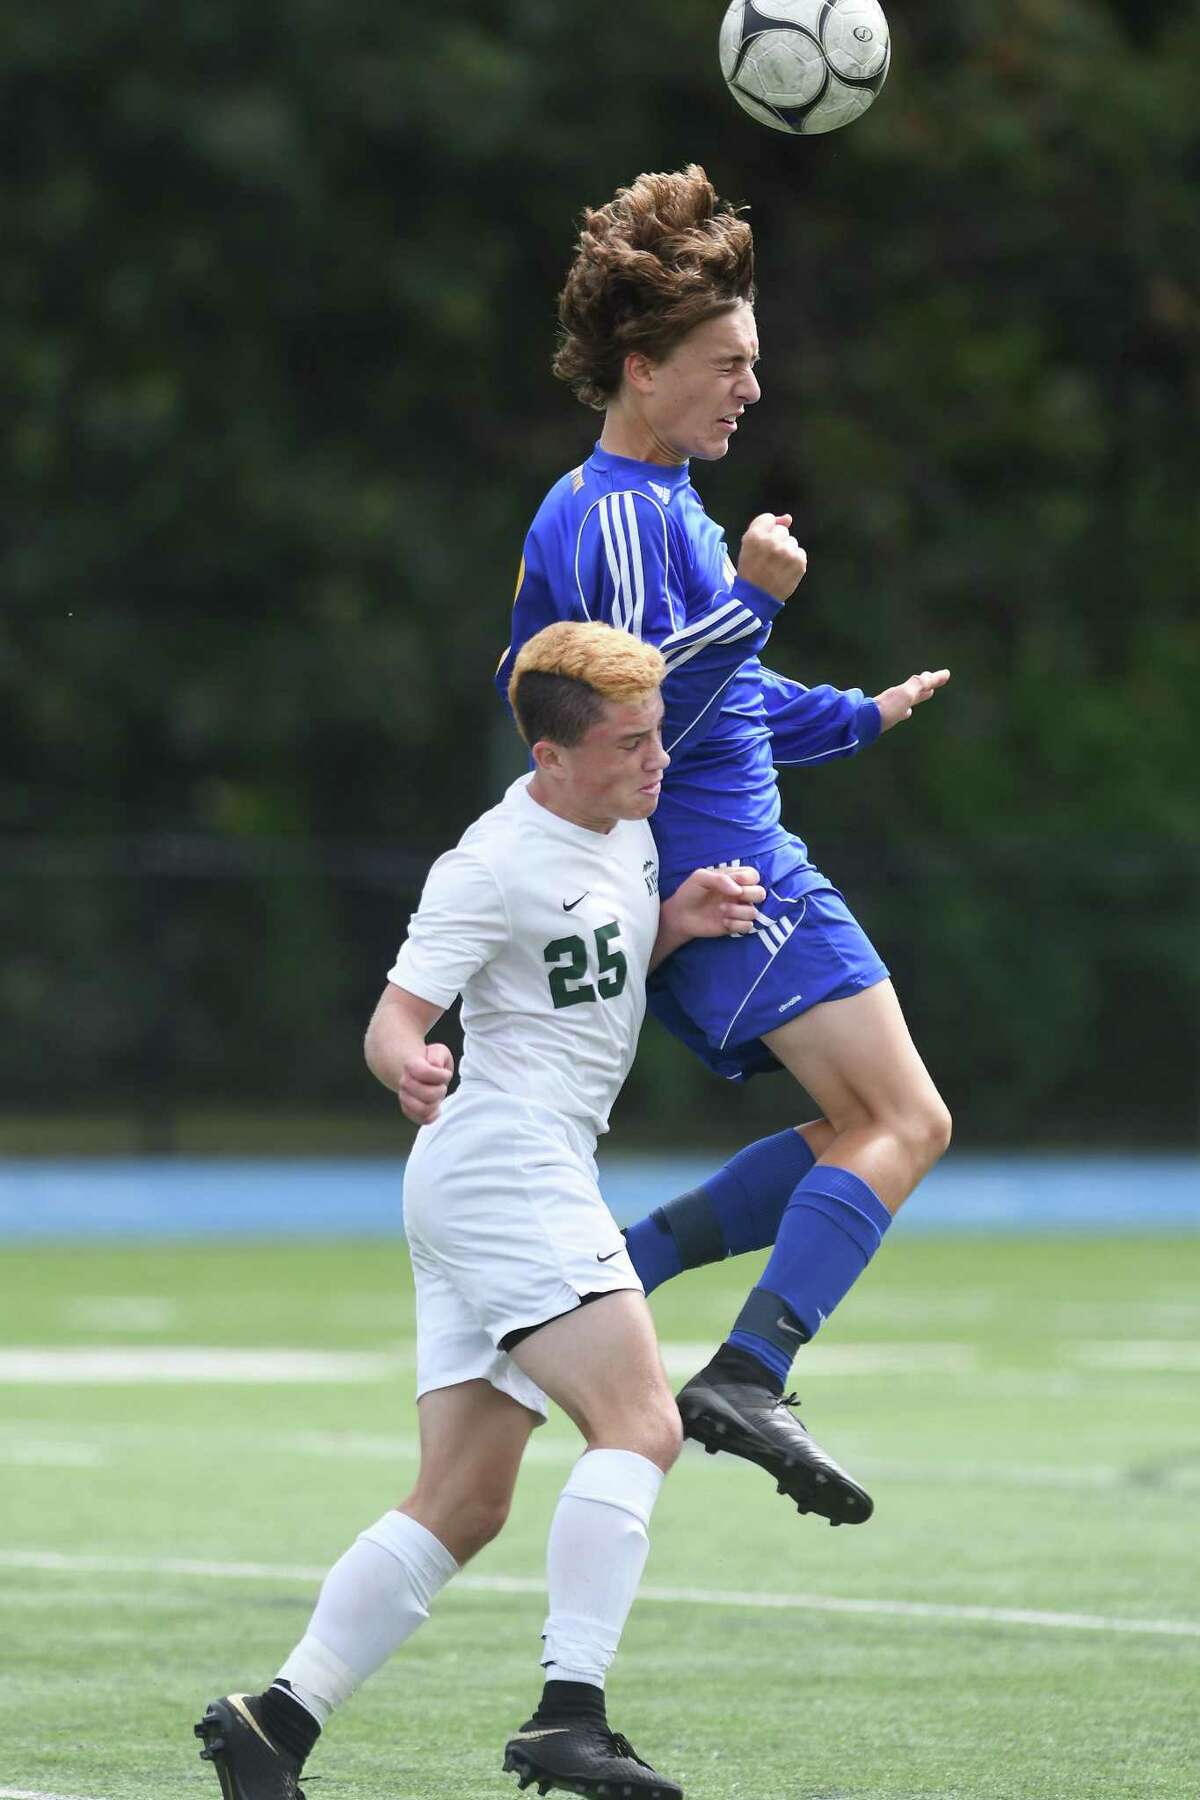 Newtown’s Ryan Rudy, top, heads the ball over New Milford’s Zachary Best during the New Milford at Newtown boys soccer game, Sept. 22, 2018.